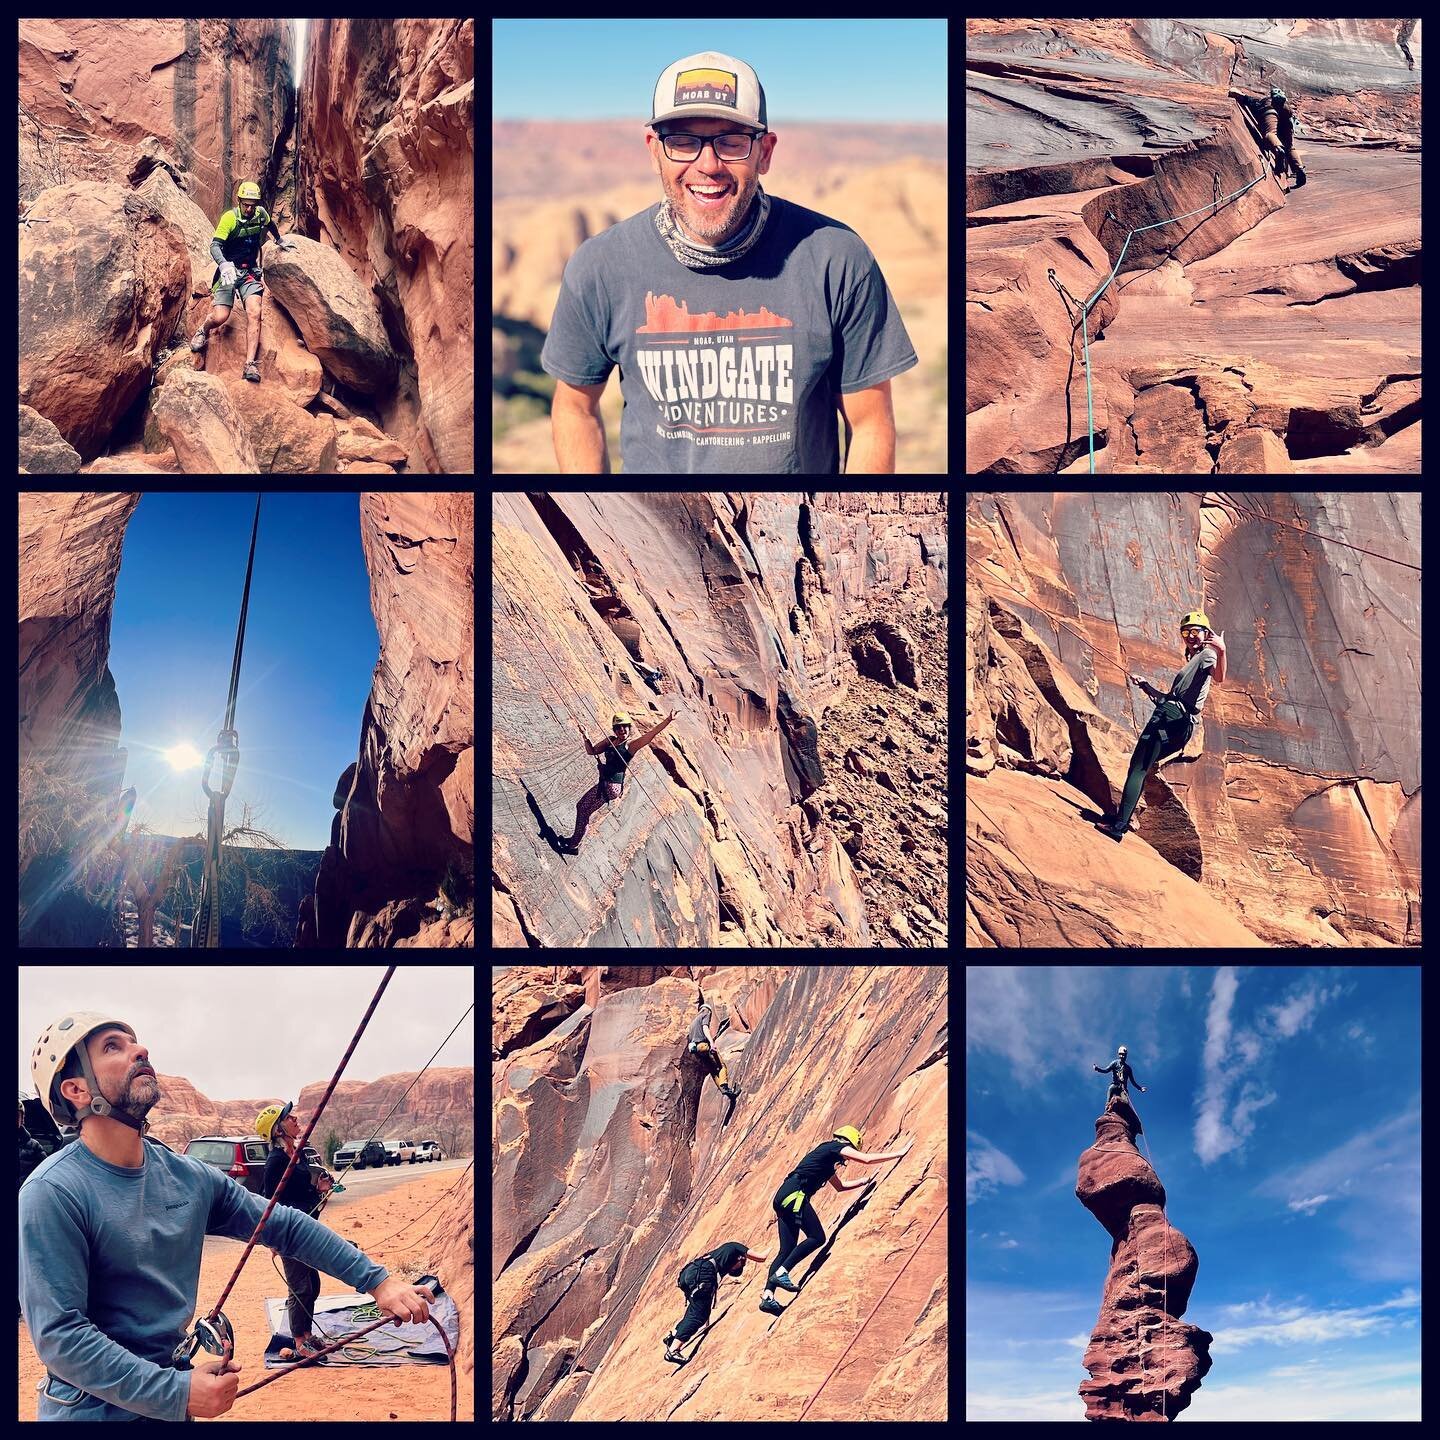 Are you ready to get out of your comfort zone, to learn new rock climbing skills or to enjoy the Moab vacation of the year, canyoneering with Windgate Adventures? Send a DM or email use directly, and let&rsquo;s customize the tour for you. Here are a